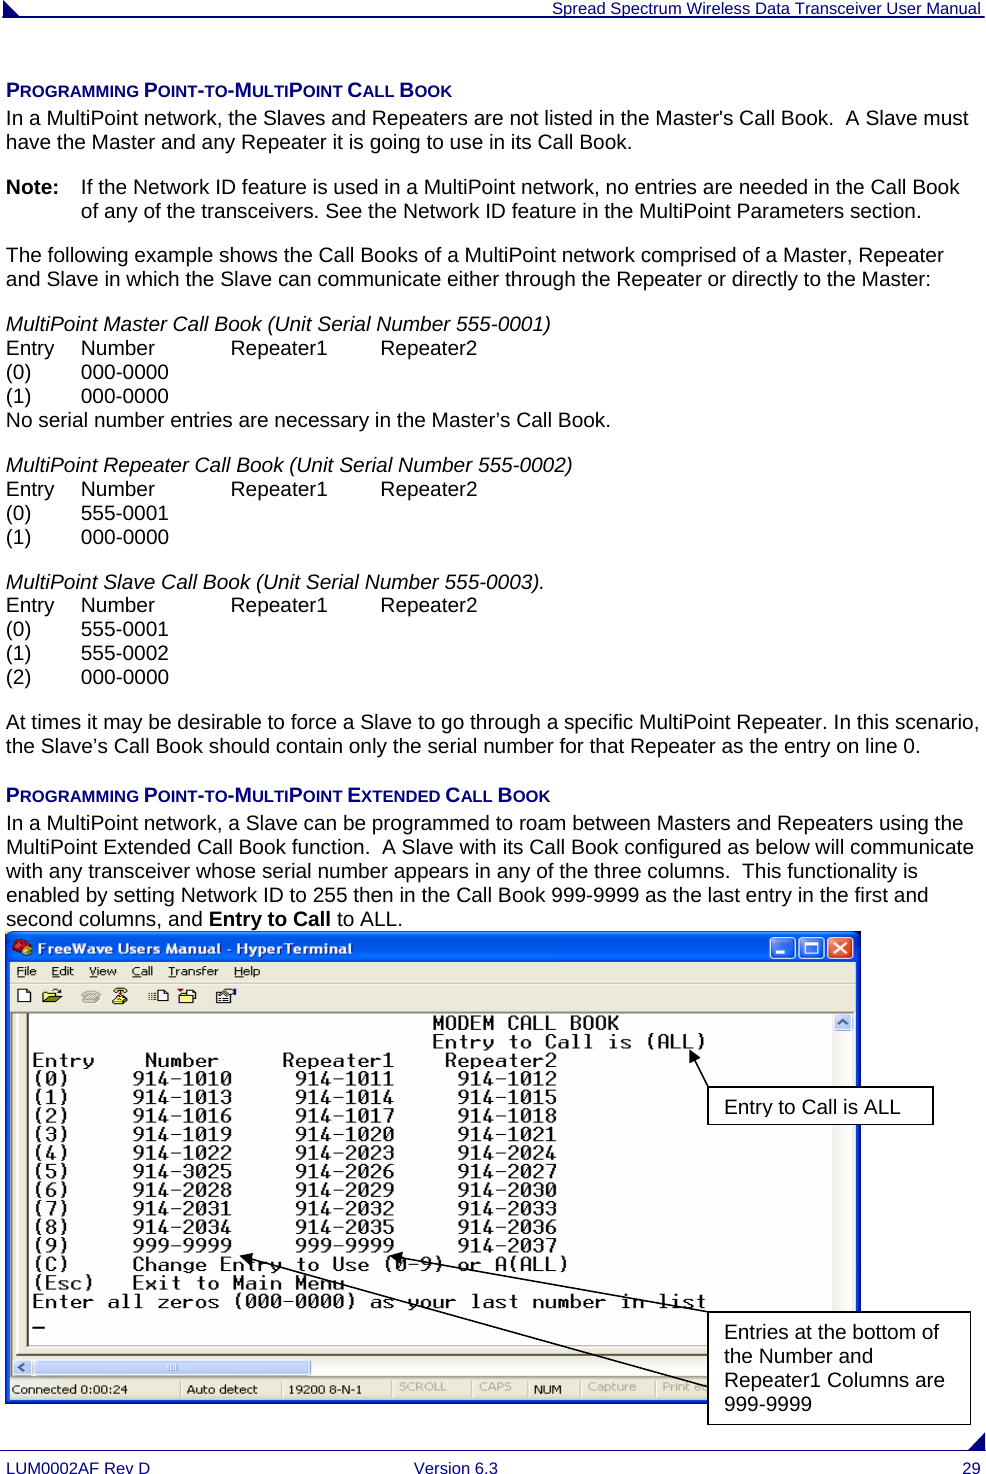  Spread Spectrum Wireless Data Transceiver User Manual LUM0002AF Rev D  Version 6.3  29 PROGRAMMING POINT-TO-MULTIPOINT CALL BOOK  In a MultiPoint network, the Slaves and Repeaters are not listed in the Master&apos;s Call Book.  A Slave must have the Master and any Repeater it is going to use in its Call Book.   Note:   If the Network ID feature is used in a MultiPoint network, no entries are needed in the Call Book of any of the transceivers. See the Network ID feature in the MultiPoint Parameters section. The following example shows the Call Books of a MultiPoint network comprised of a Master, Repeater and Slave in which the Slave can communicate either through the Repeater or directly to the Master: MultiPoint Master Call Book (Unit Serial Number 555-0001)                                                                   Entry   Number   Repeater1   Repeater2                                                                                          (0)  000-0000                                                                                                                                        (1)   000-0000                                                                                                                                        No serial number entries are necessary in the Master’s Call Book.  MultiPoint Repeater Call Book (Unit Serial Number 555-0002)                                                                       Entry   Number   Repeater1   Repeater2                                                                                   (0)   555-0001                                                                                                                                        (1)   000-0000 MultiPoint Slave Call Book (Unit Serial Number 555-0003).                                                                     Entry   Number   Repeater1   Repeater2                                                                                   (0)   555-0001                                                                                                                                         (1)   555-0002                                                                                                                                        (2)   000-0000 At times it may be desirable to force a Slave to go through a specific MultiPoint Repeater. In this scenario, the Slave’s Call Book should contain only the serial number for that Repeater as the entry on line 0. PROGRAMMING POINT-TO-MULTIPOINT EXTENDED CALL BOOK In a MultiPoint network, a Slave can be programmed to roam between Masters and Repeaters using the MultiPoint Extended Call Book function.  A Slave with its Call Book configured as below will communicate with any transceiver whose serial number appears in any of the three columns.  This functionality is enabled by setting Network ID to 255 then in the Call Book 999-9999 as the last entry in the first and second columns, and Entry to Call to ALL.  Entry to Call is ALLEntries at the bottom of the Number and Repeater1 Columns are 999-9999 